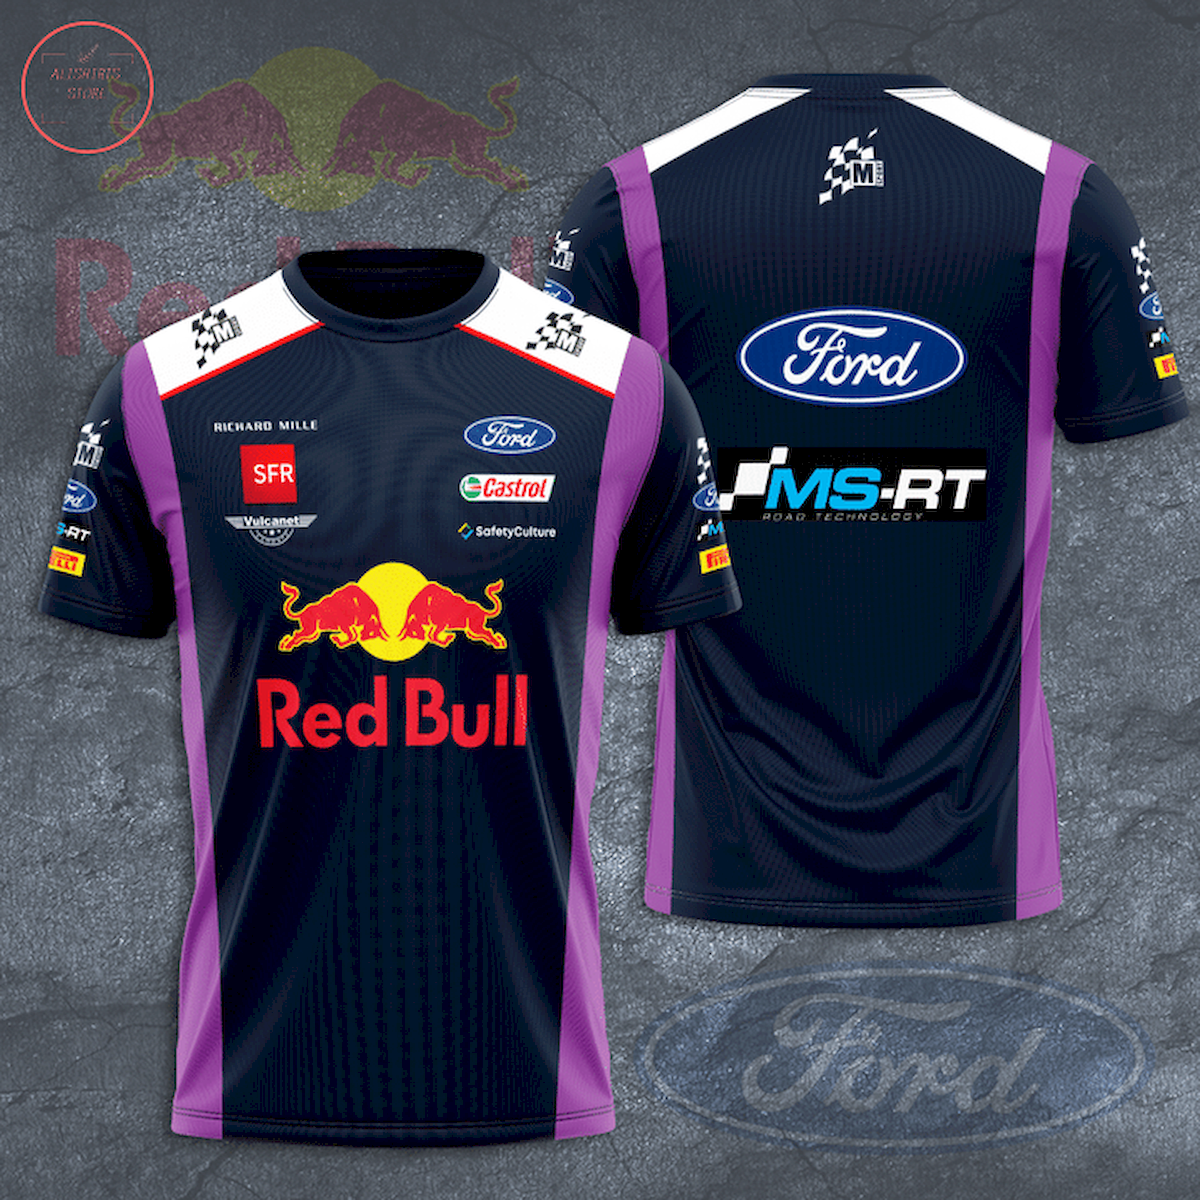 [HOT] Red Bull Ford MS-RT Road Technology T-shirt 3d